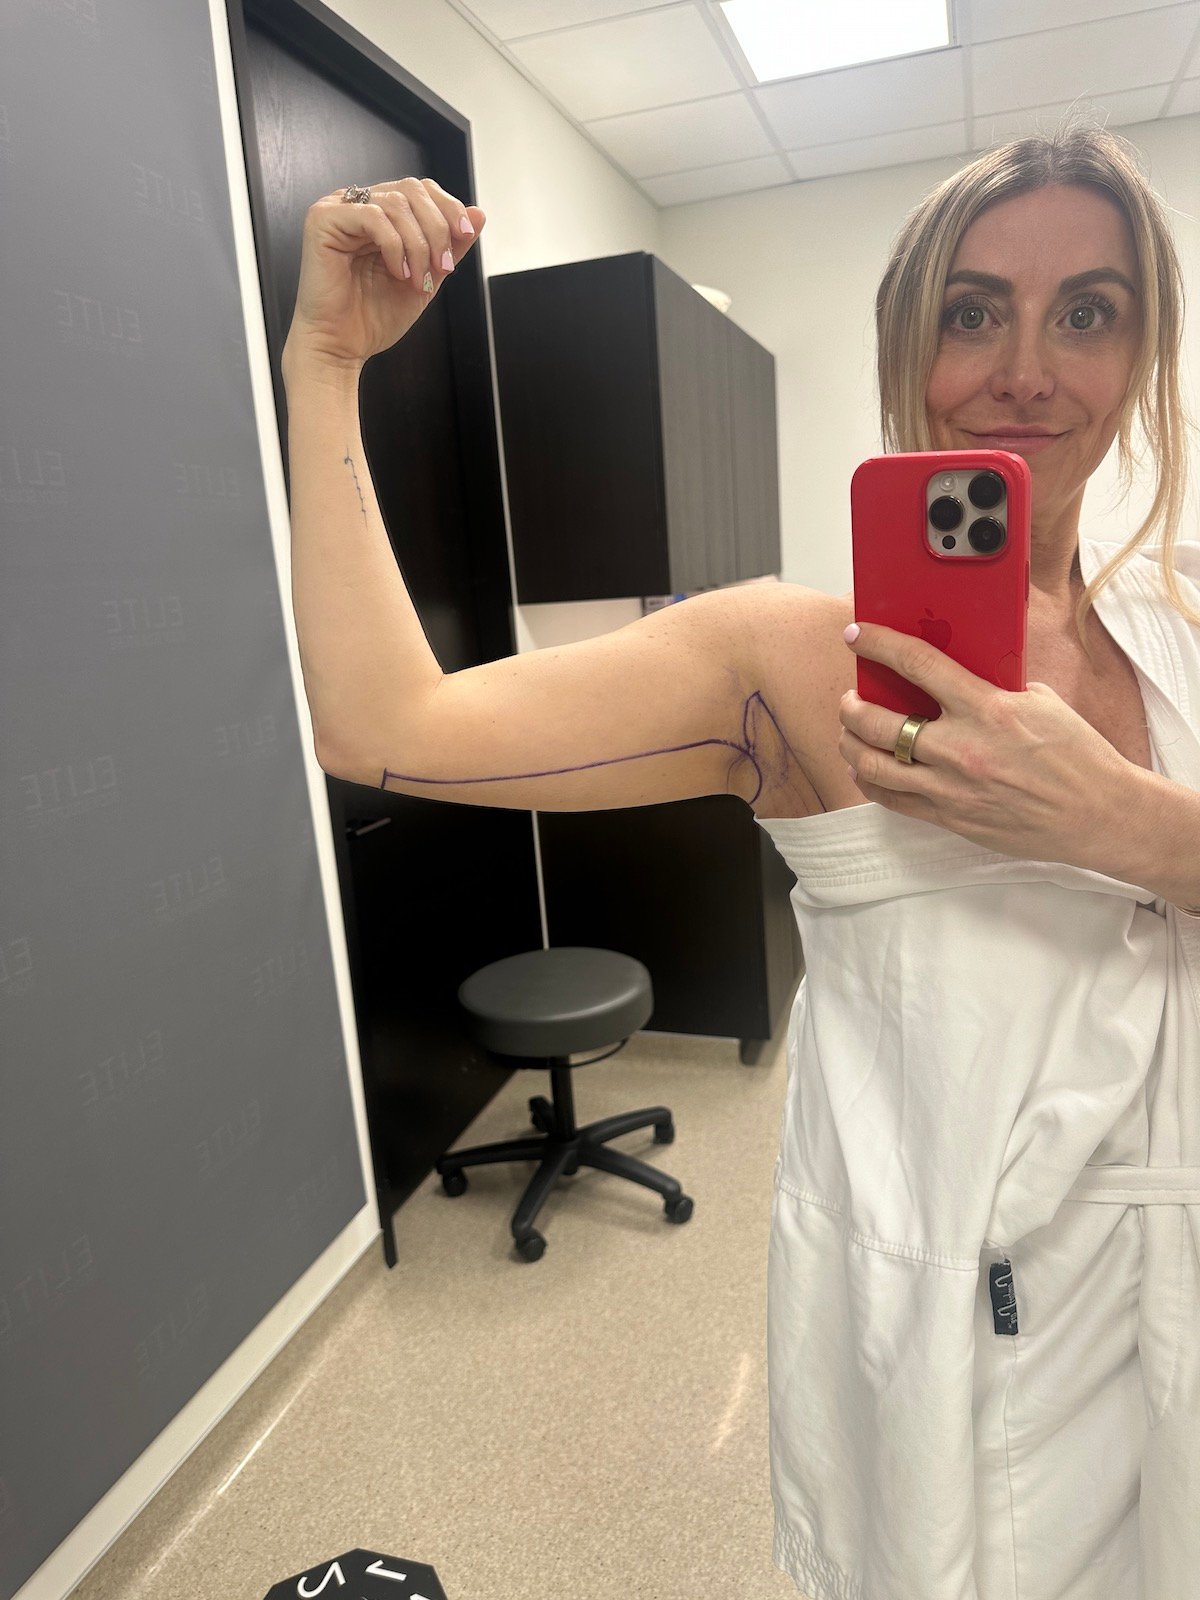 A woman takes a selfie in a mirror showing the lines a doctor made on her arm before her medical procedure. 